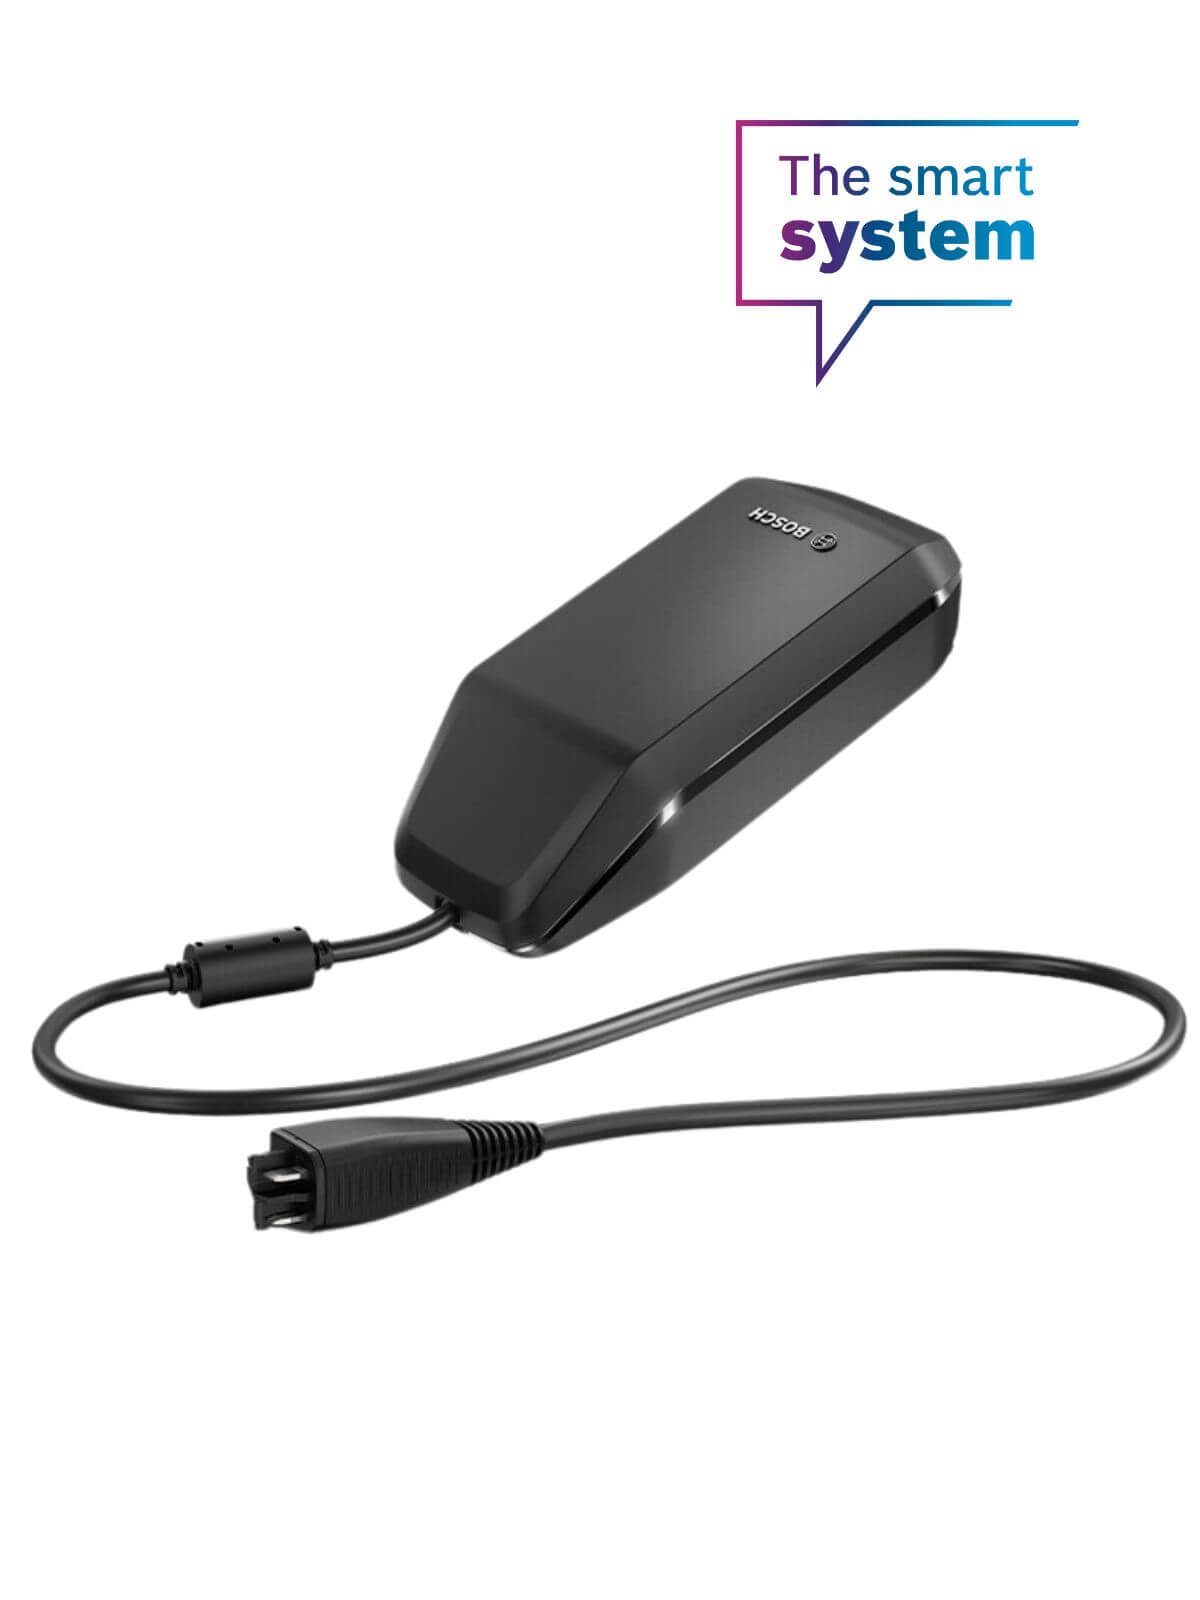 Bosch Smart System Charger